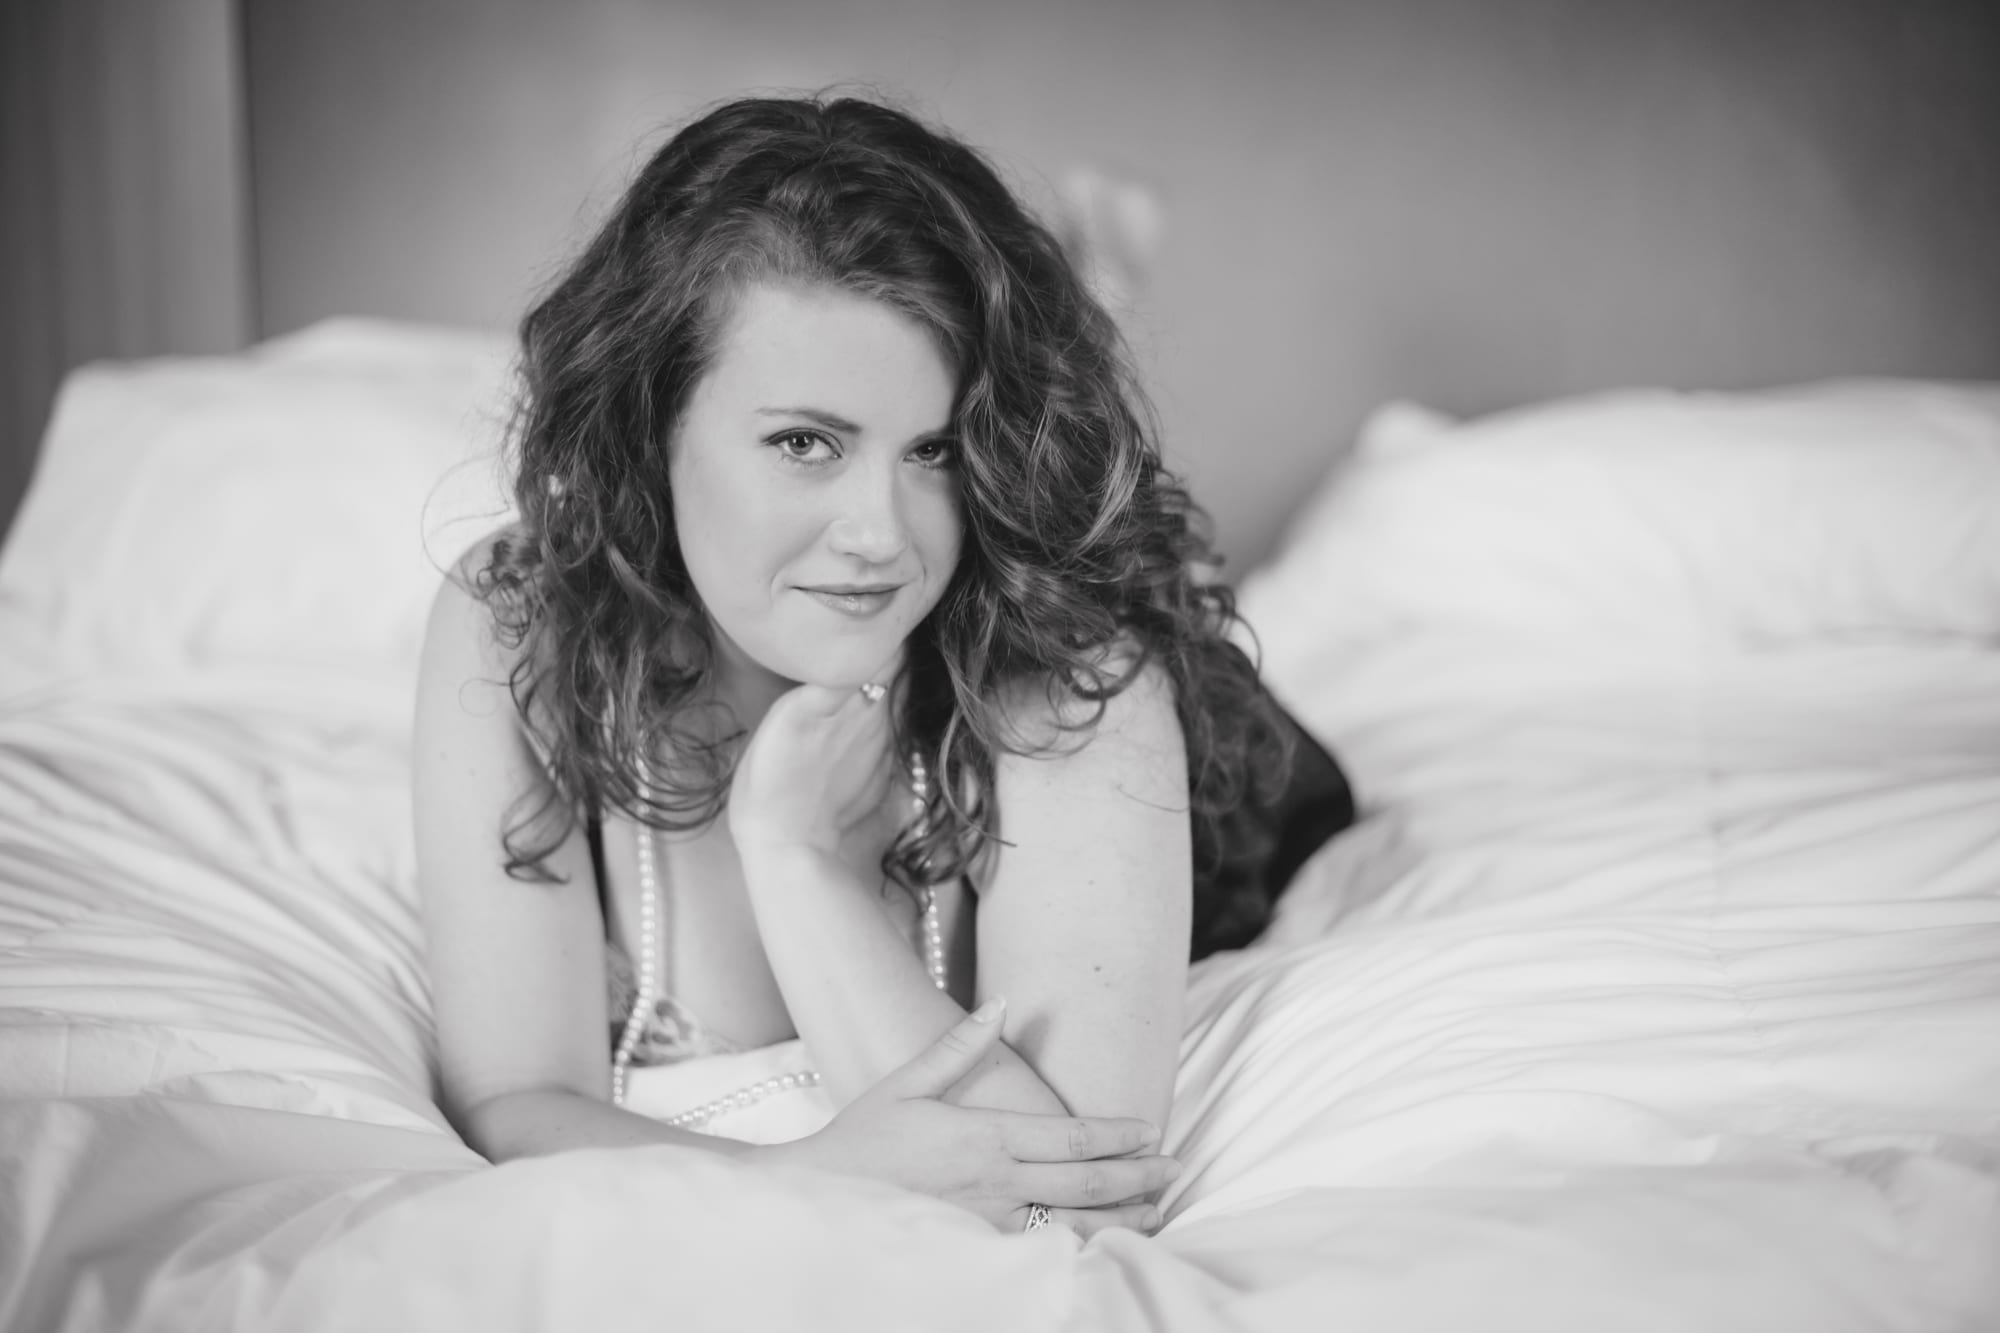 Charlotte Boudoir Photography Charlotte NC - Casey ... from caseyhphotos.co...